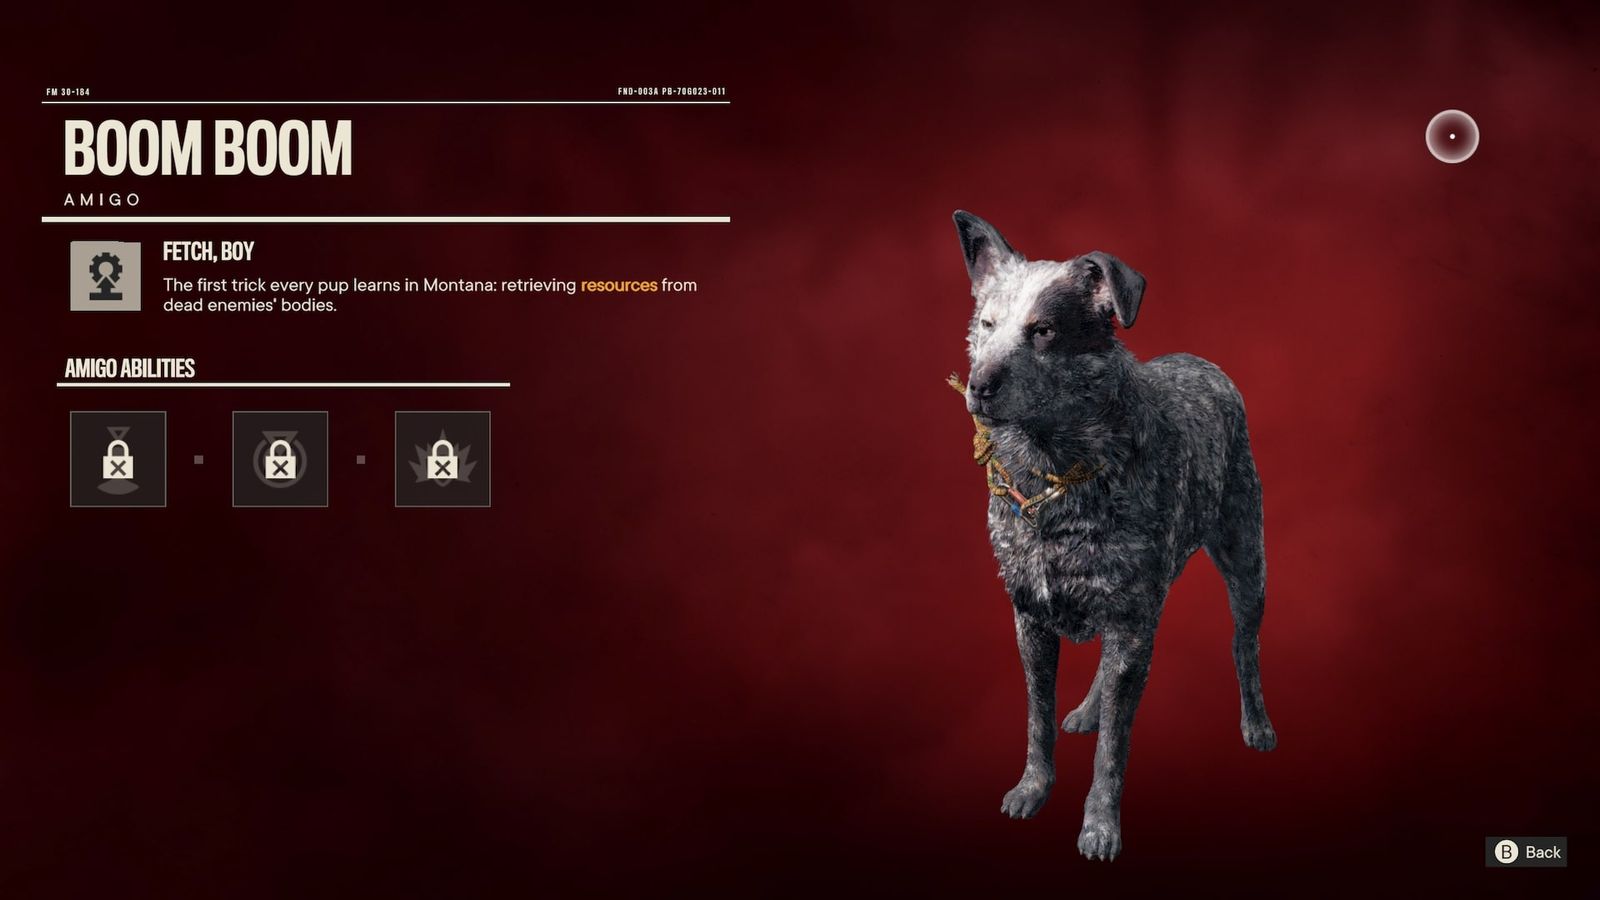 Far Cry 6's Boom Boom, a dog companion that is in reference to Far Cry 5's Boomer - a Stealth Amigo.